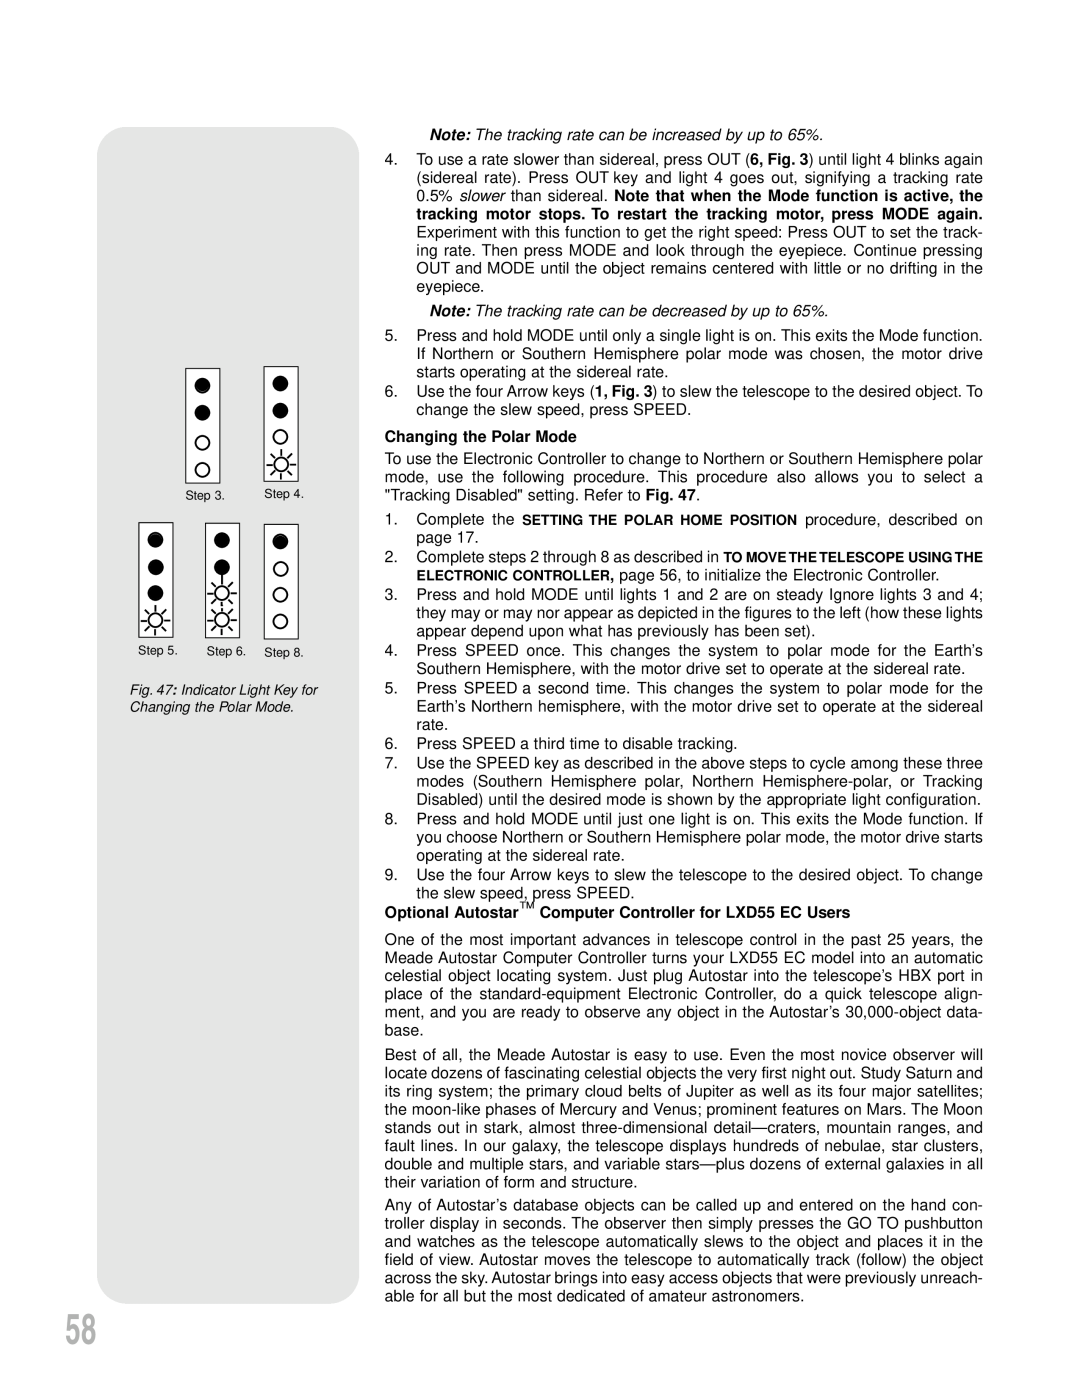 Meade instruction manual Changing the Polar Mode, Optional Autostar Computer Controller for LXD55 EC Users 